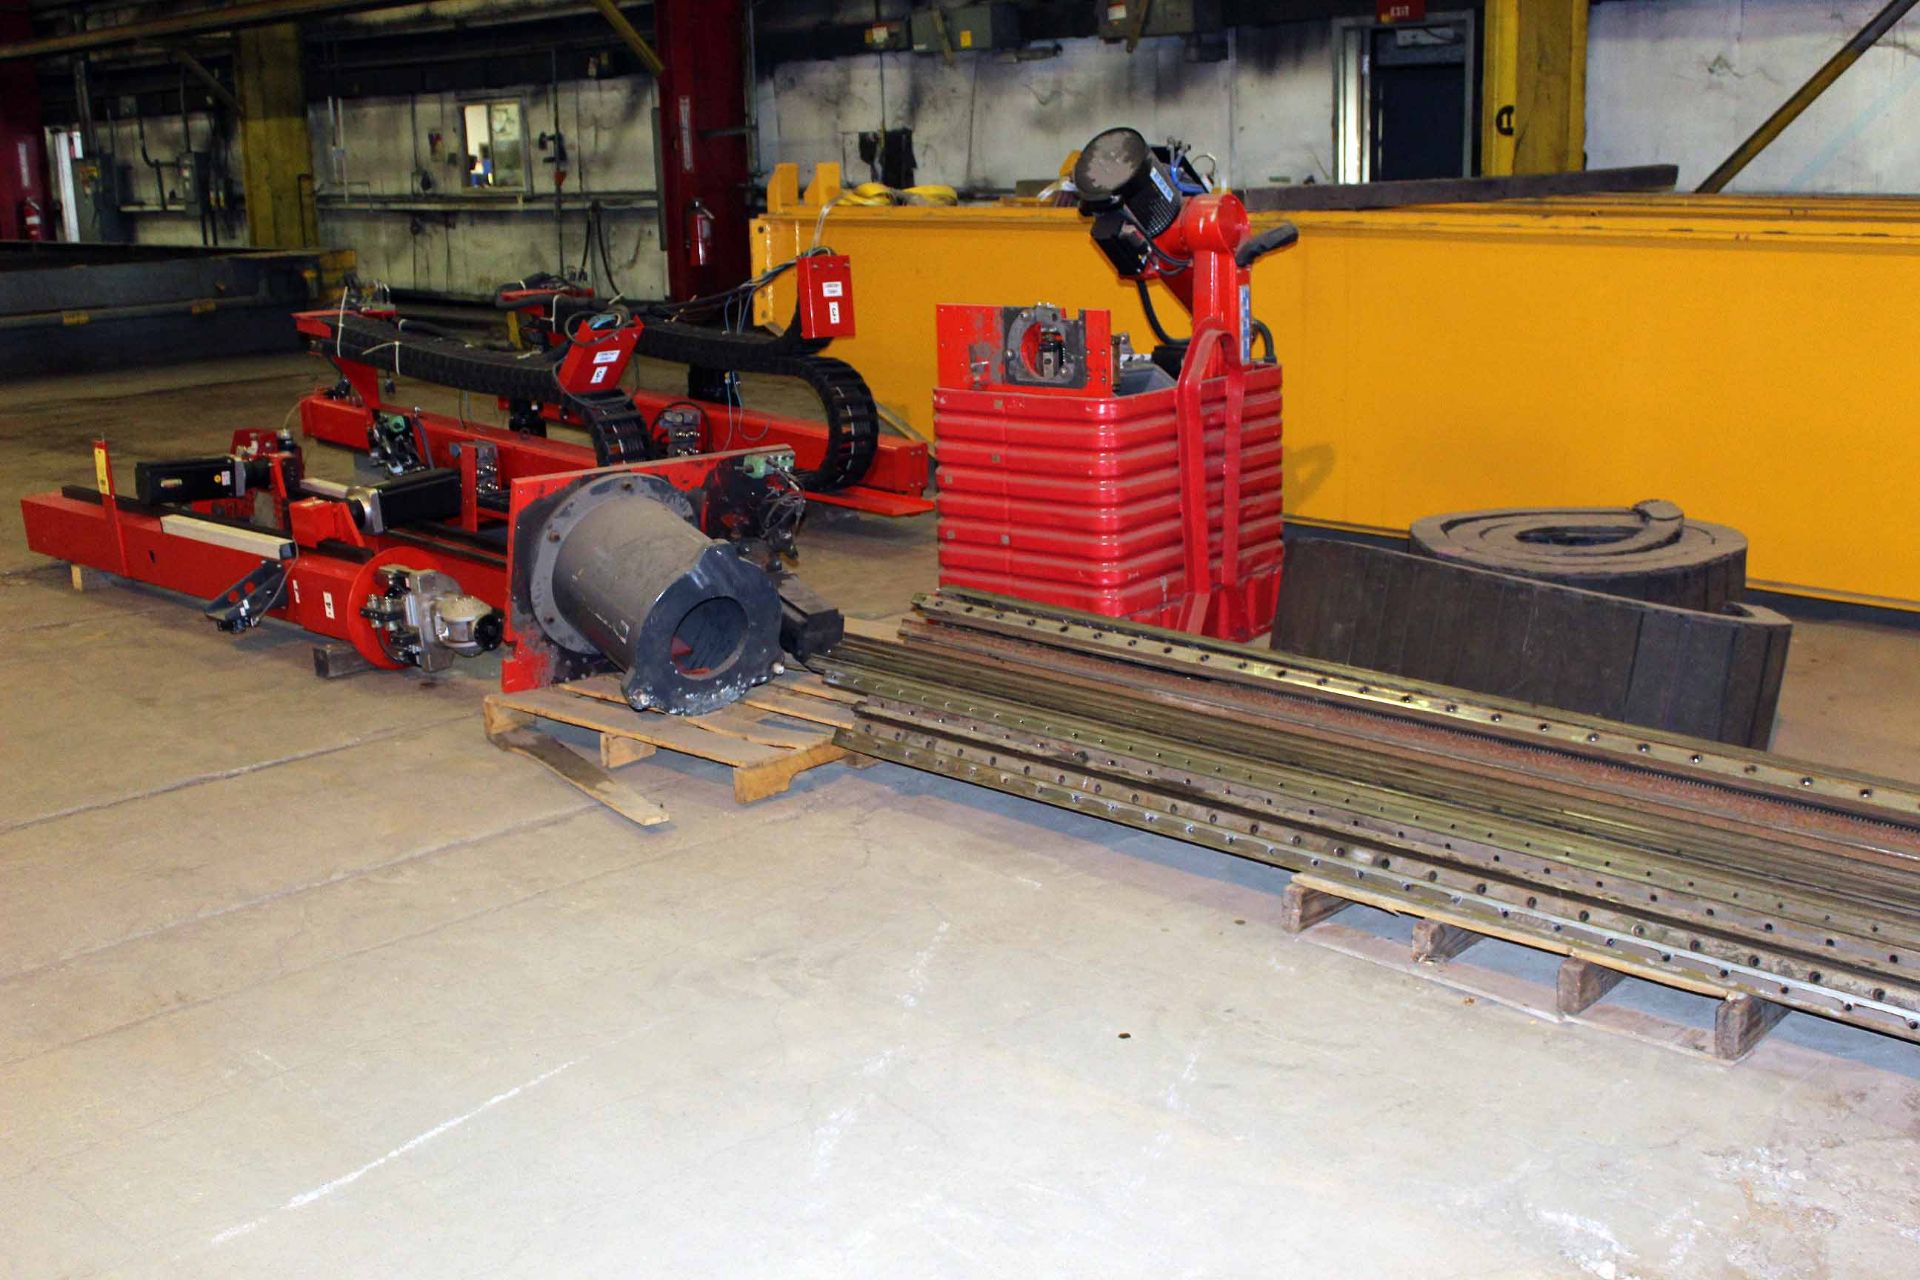 LOT CONSISTING OF: Reis Weld Automation Manipulator heads, Reis Weld Automation 2-axis tilting